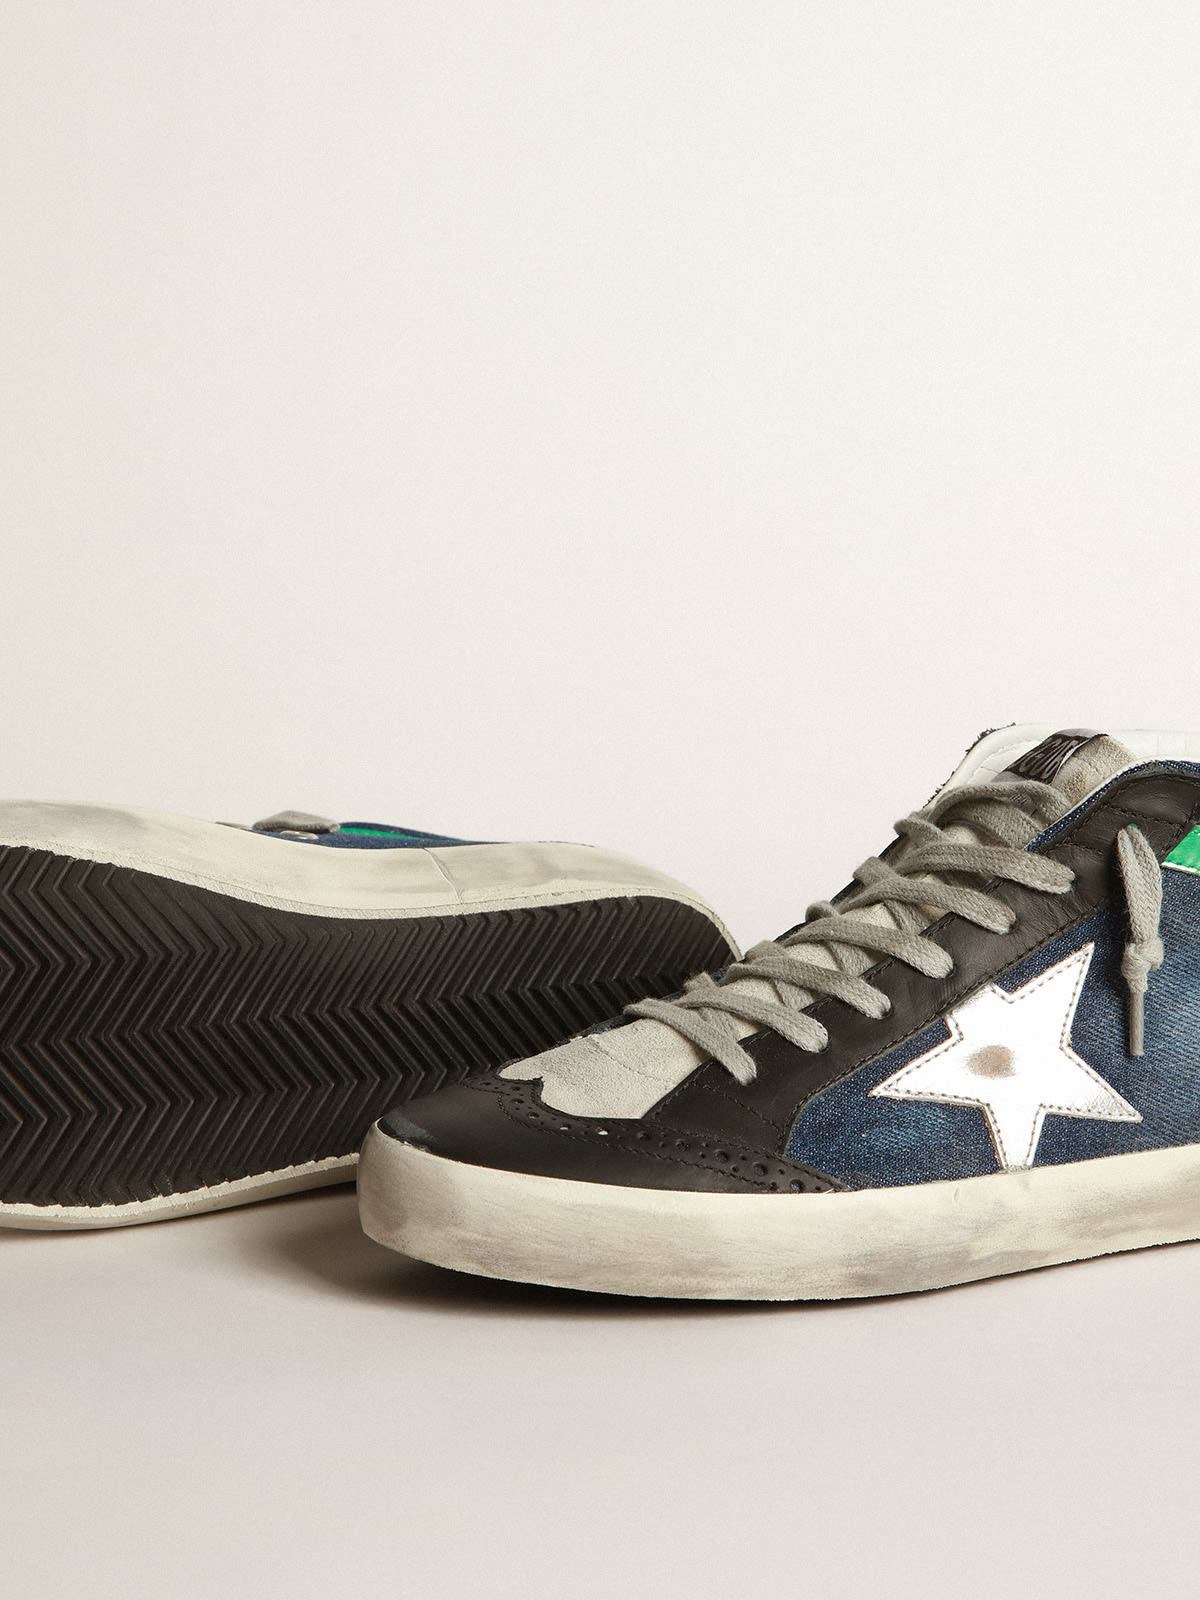 Mid Star sneakers in blue denim with silver laminated leather star and ...